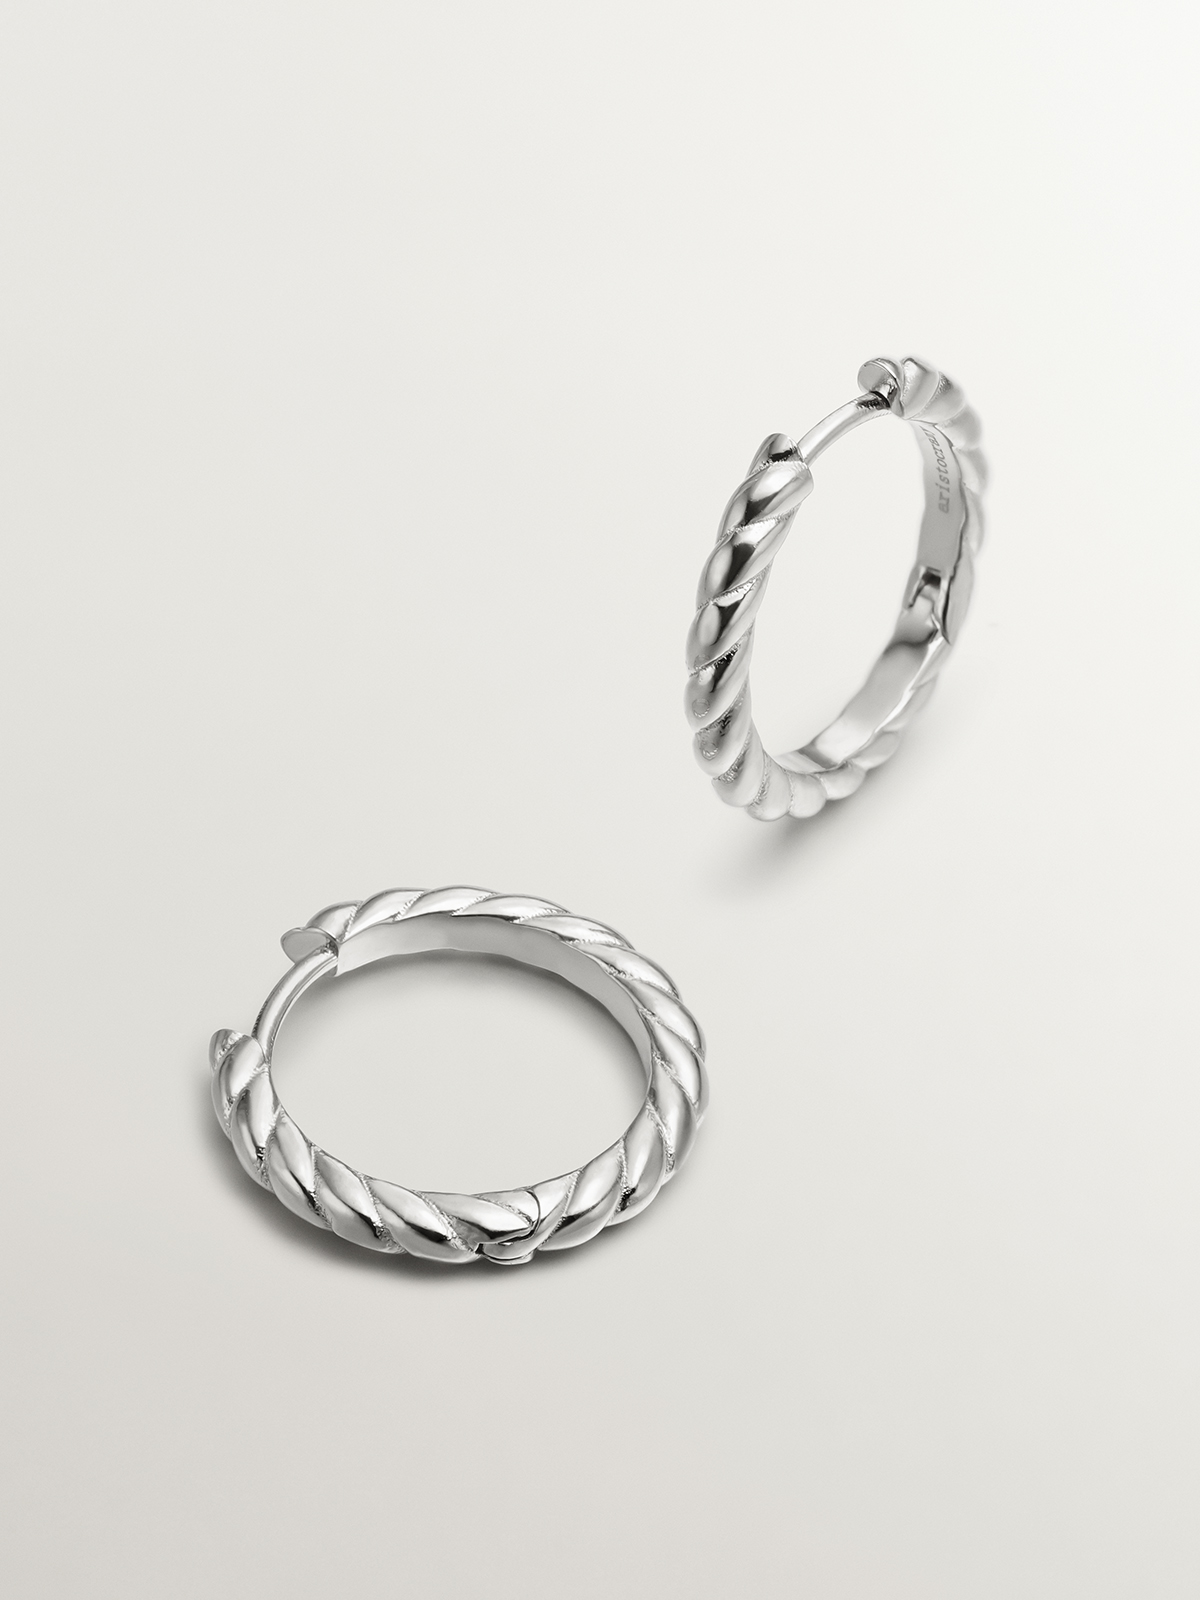 925 silver ring earrings with chicked texture